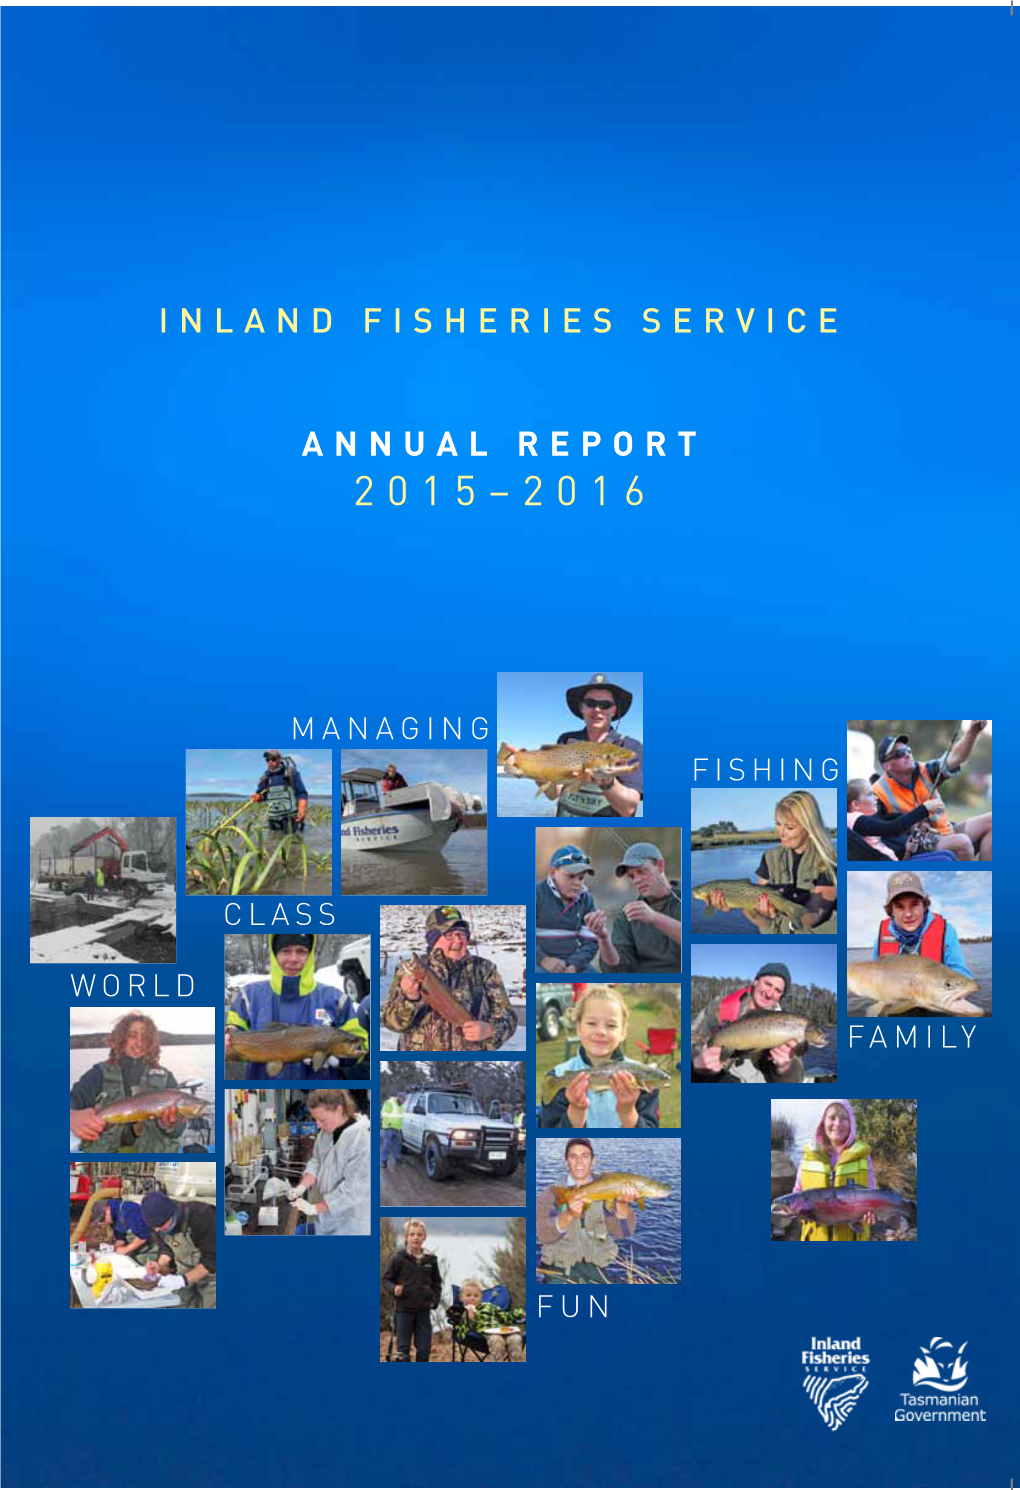 Inland Fisheries Service Annual Report 2015-16